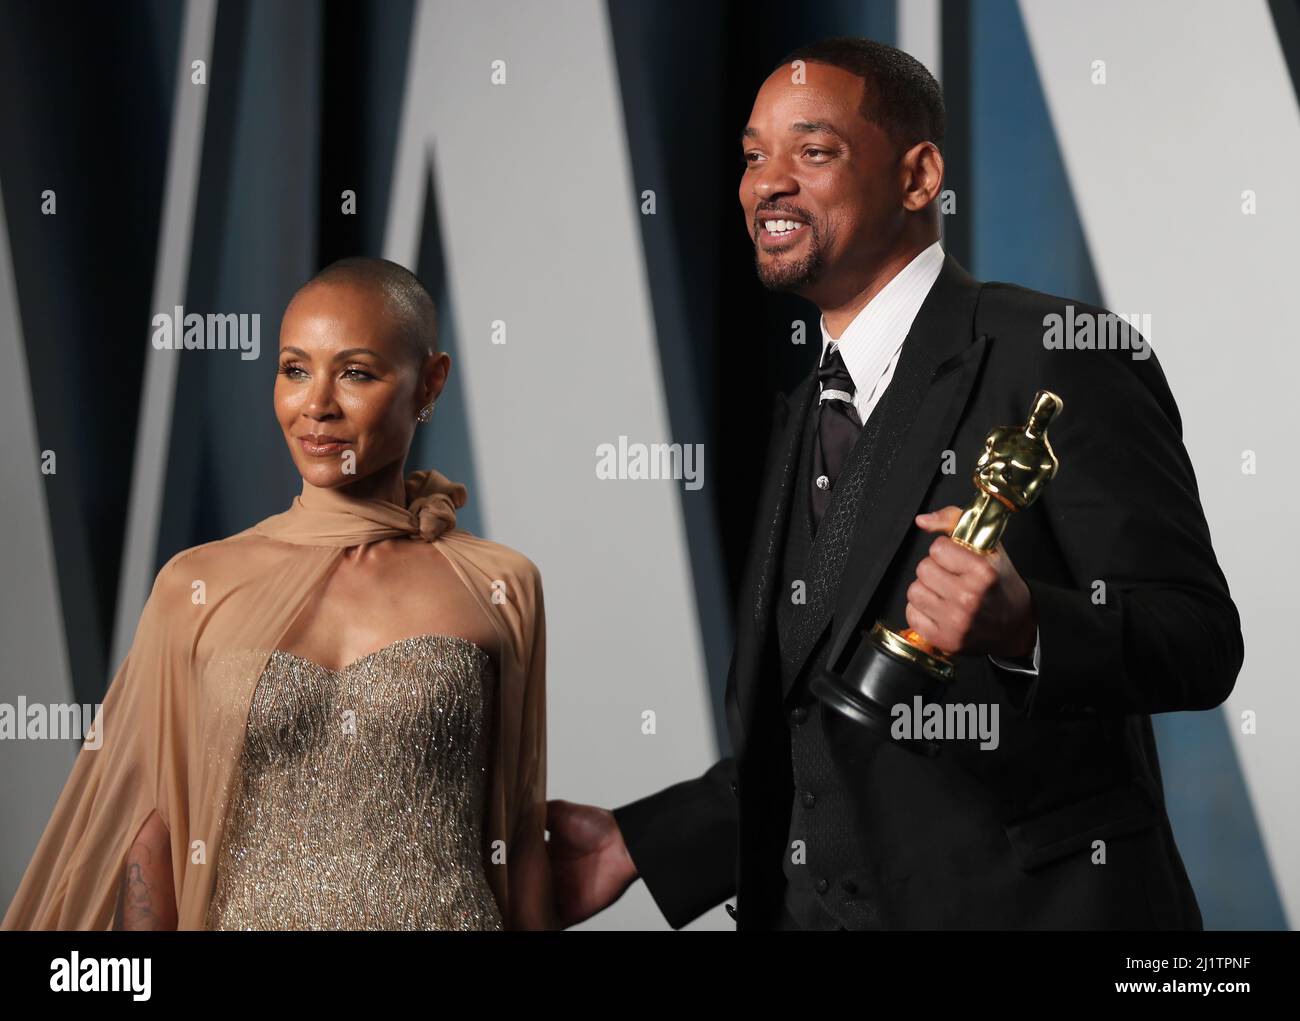 Will Smith and Jada Pinkett Smith arrive at the Vanity Fair Oscar party during the 94th Academy Awards in Beverly Hills, California, U.S., March 27, 2022.   REUTERS/Danny Moloshok Stock Photo